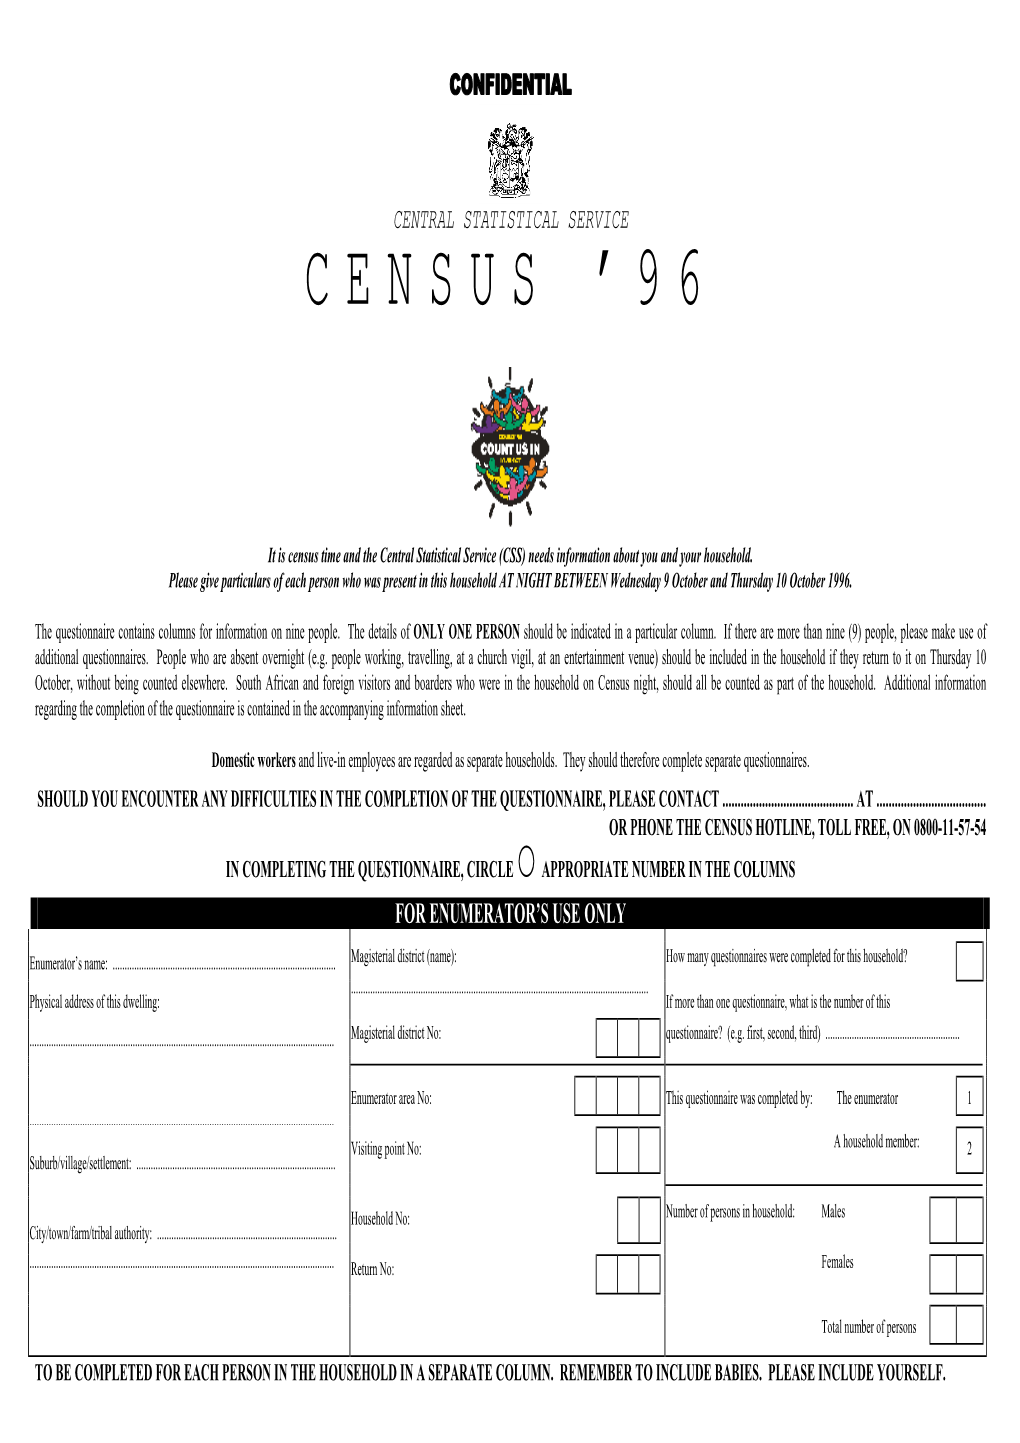 South Africa 1996 Census Enumeration Form